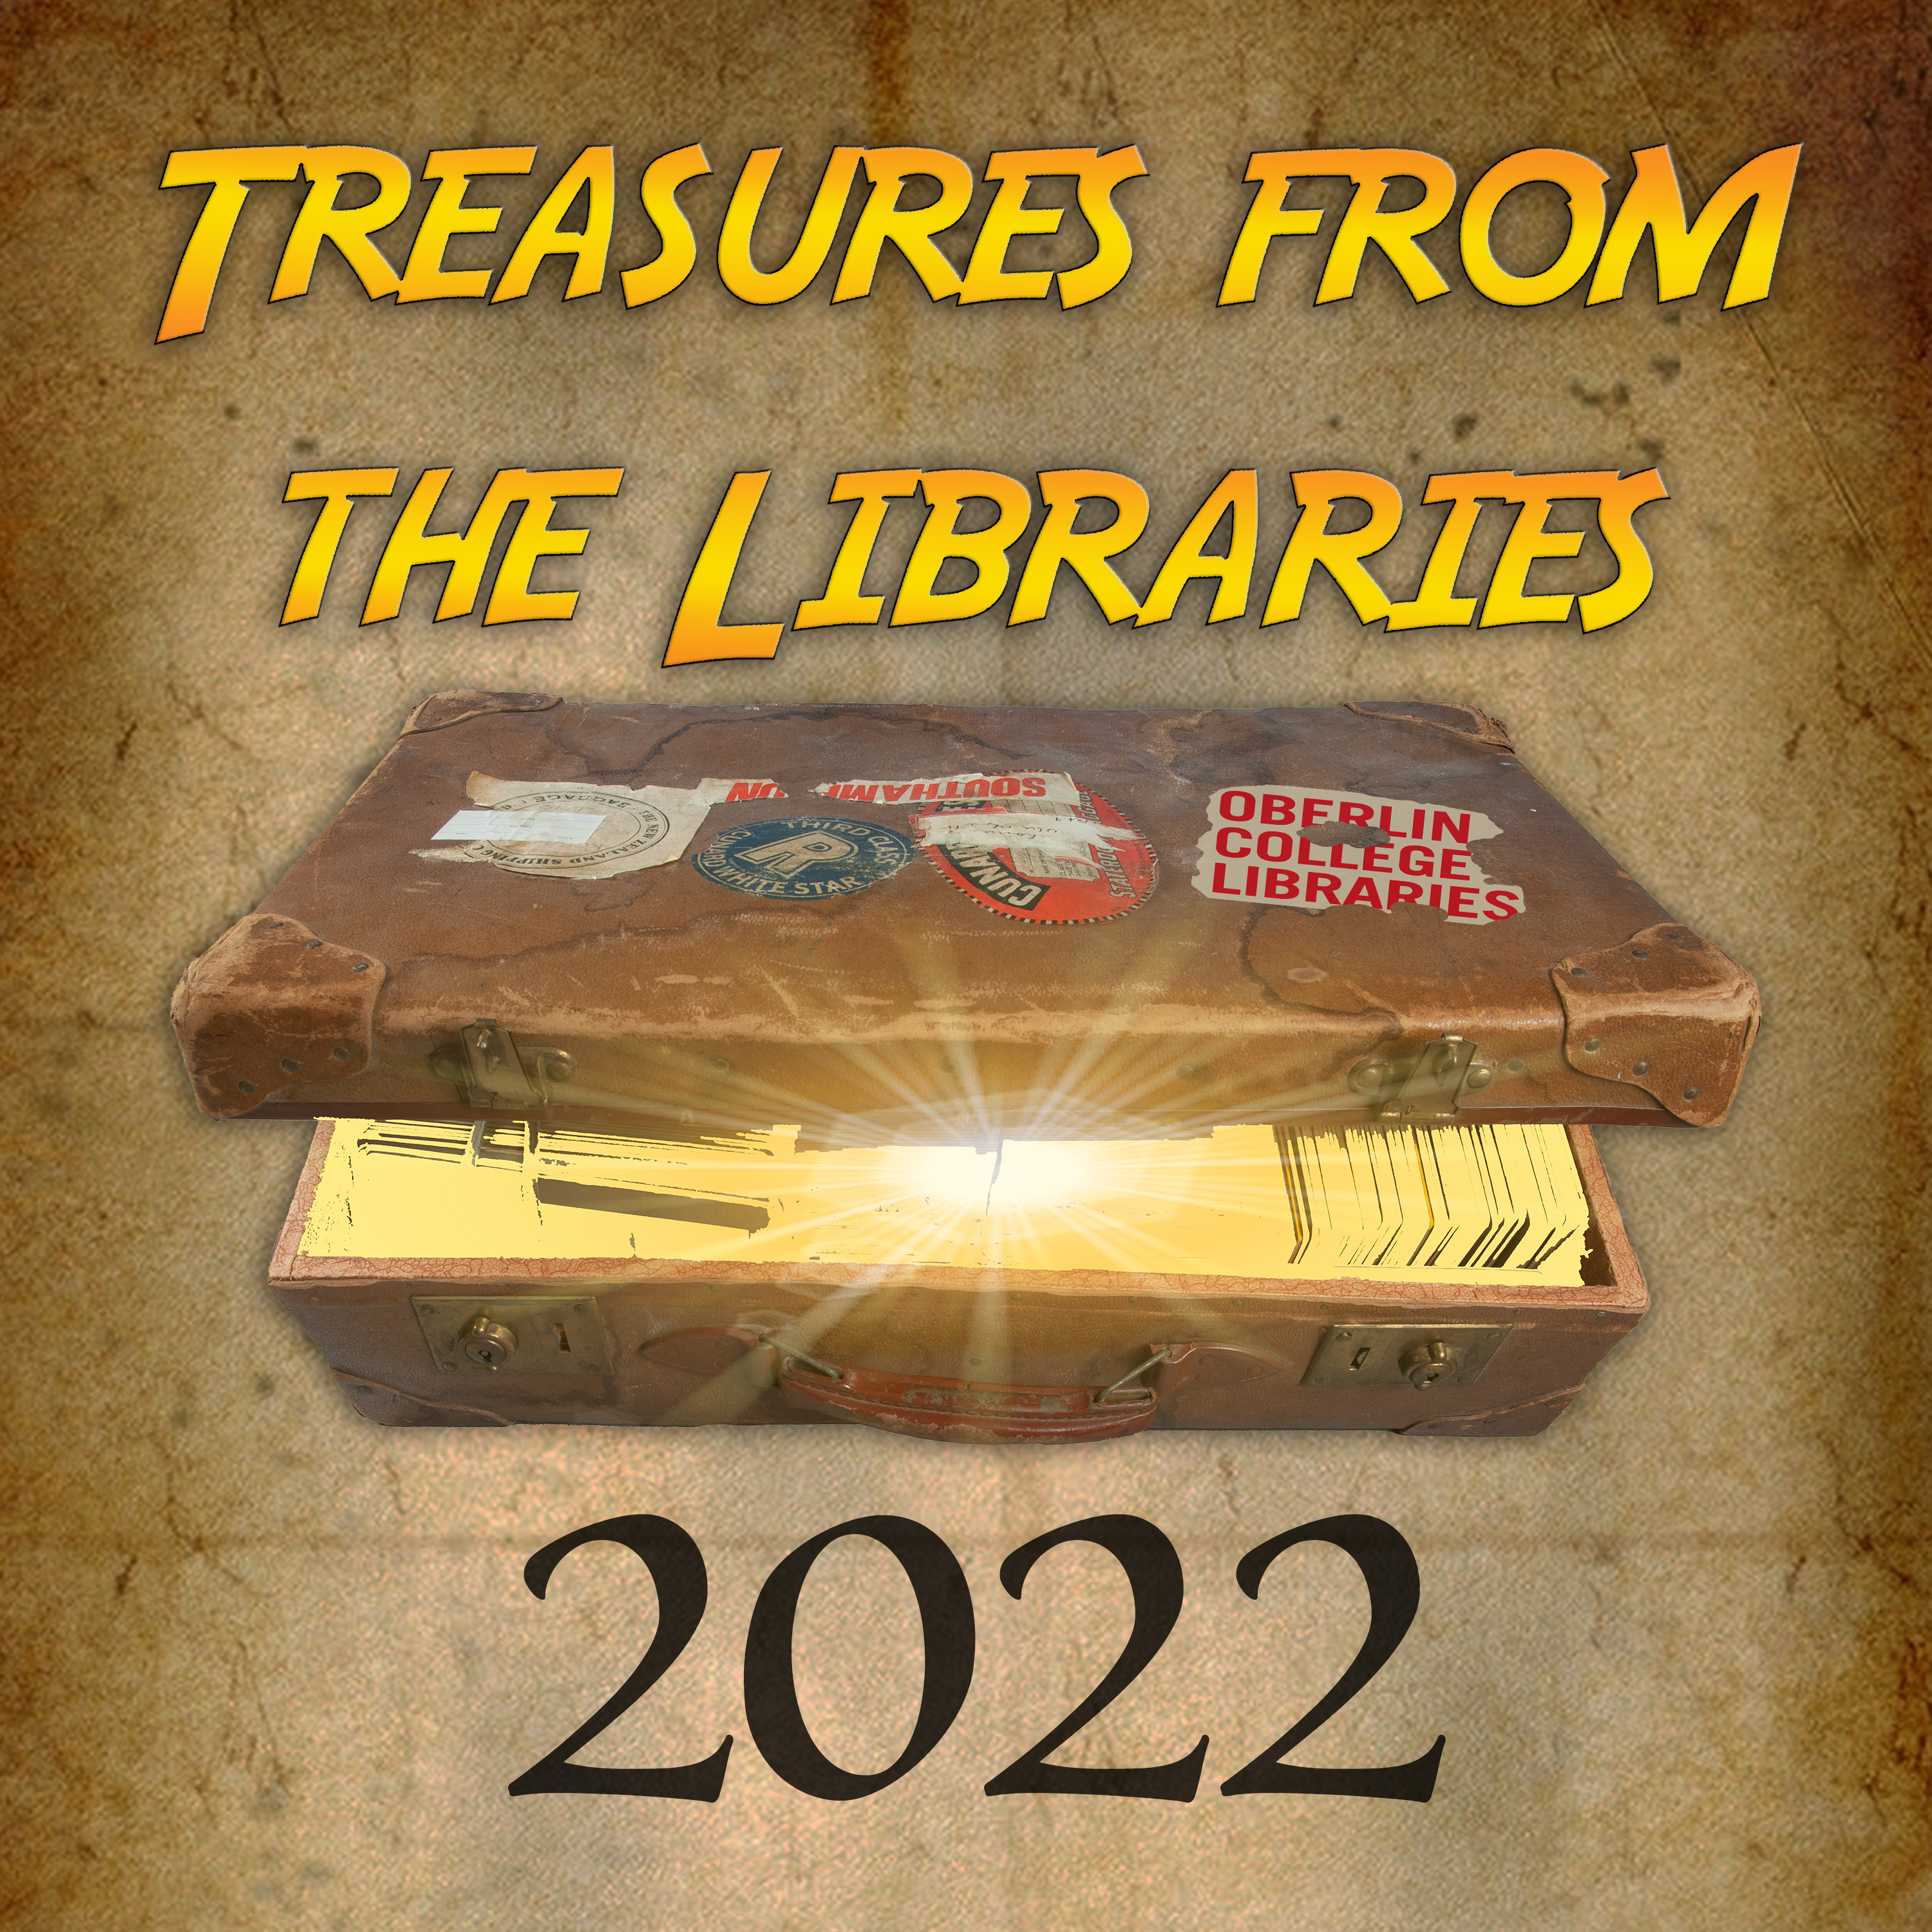 Oberlin Academic Calendar 2022 Oberlin College Libraries On Twitter: "There Is Still Time To Get Ocl's  Annual Calendar! Click To Learn How Your Gift To The  #Terrellendowedbookfund Can Get You A Copy Of Our 2022 "Treasures